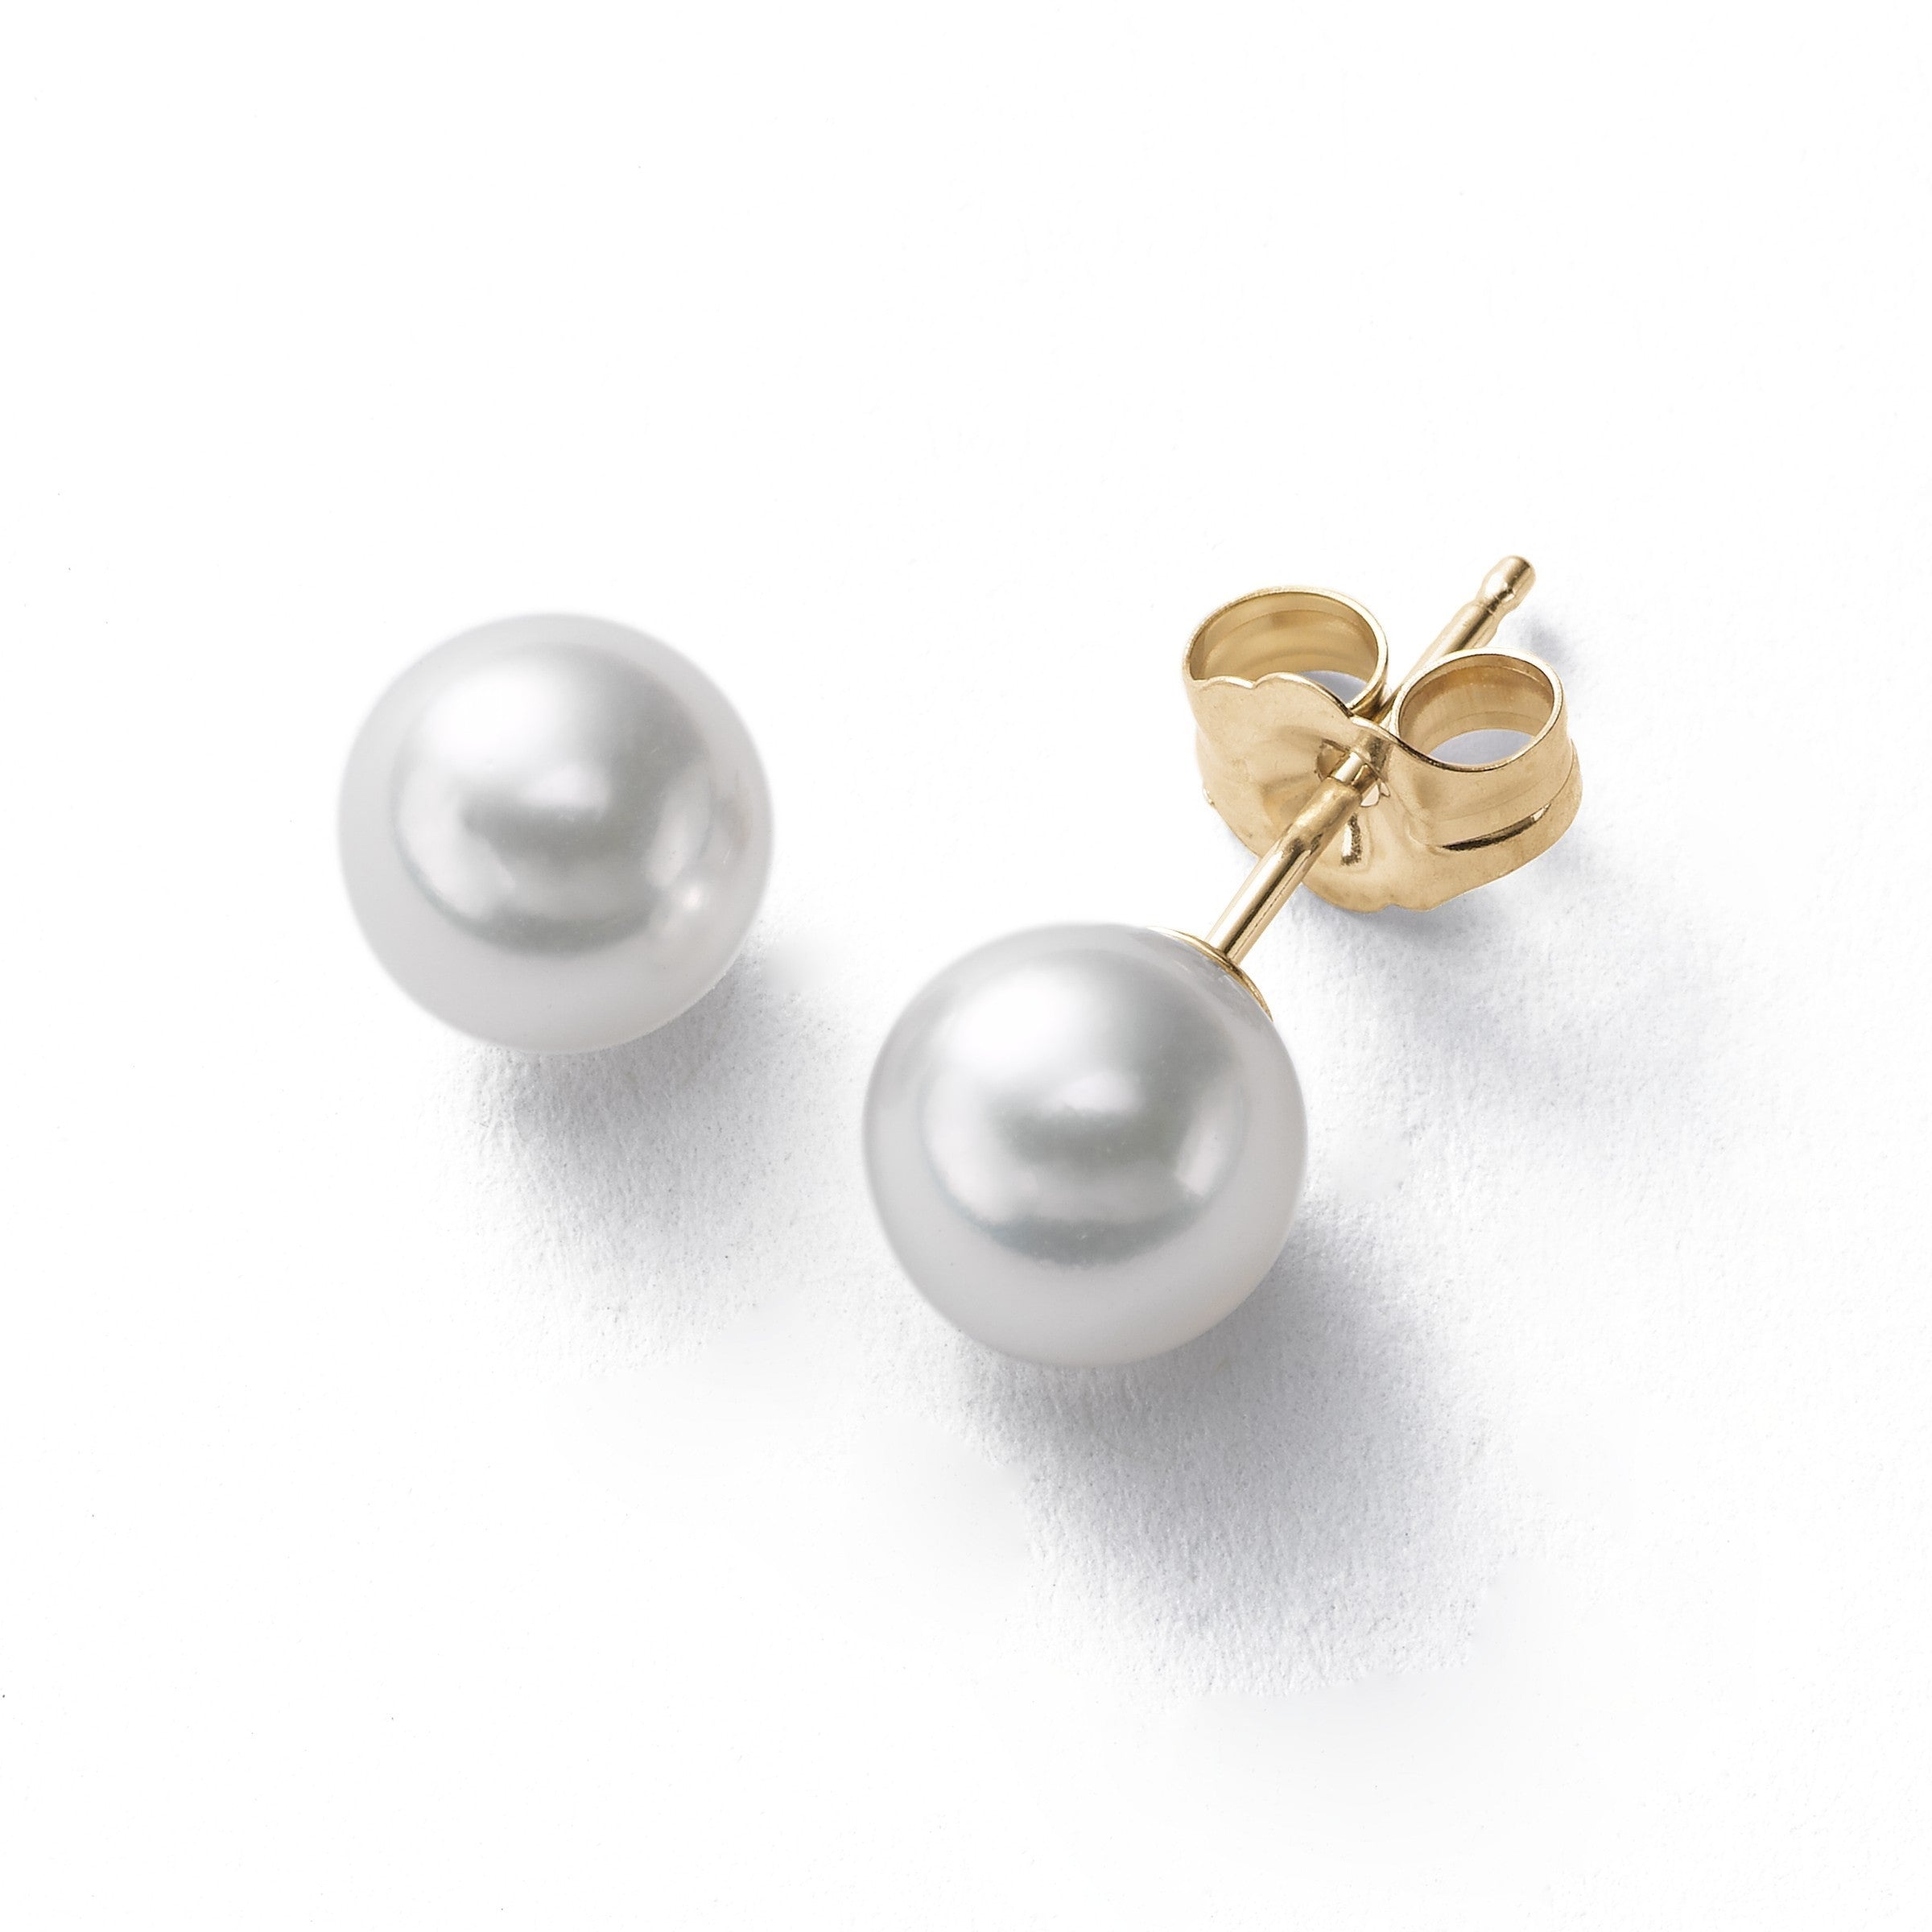 Buy Japanese Akoya Pearl Earrings on 14K Yellow Gold Studs Online in India   Etsy